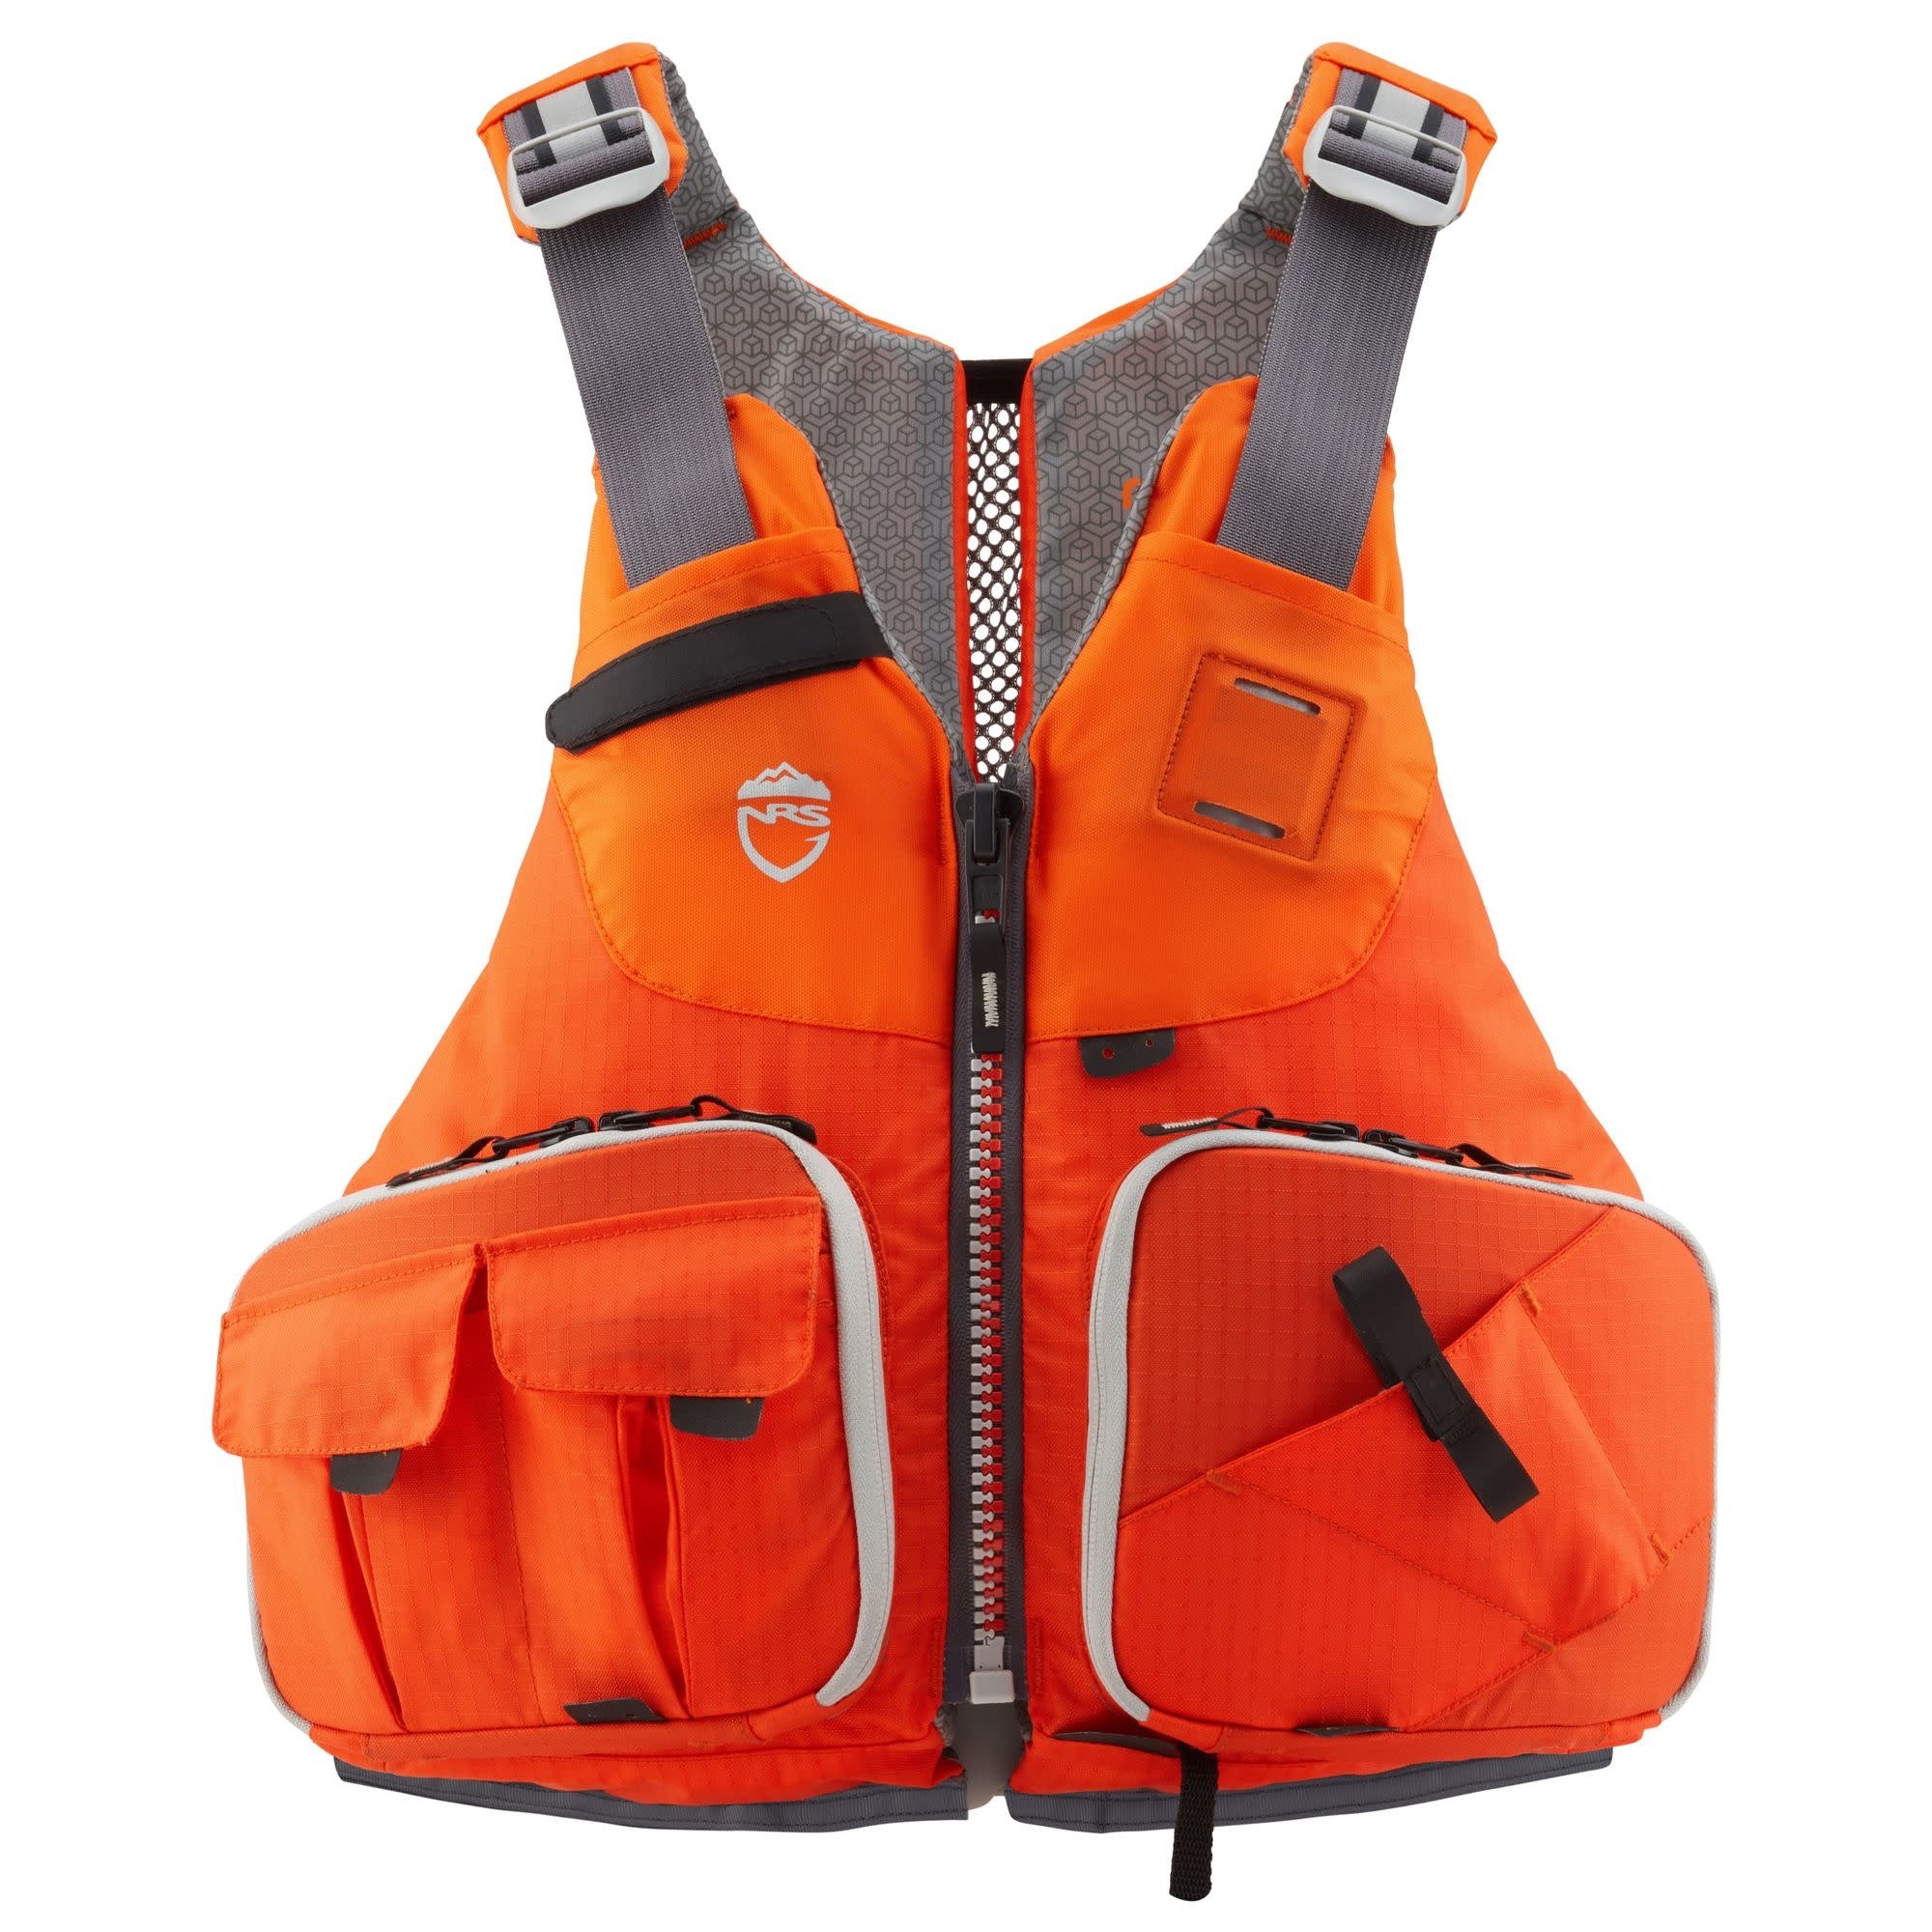 Leviathan Angler PFD – Frontenac Outfitters